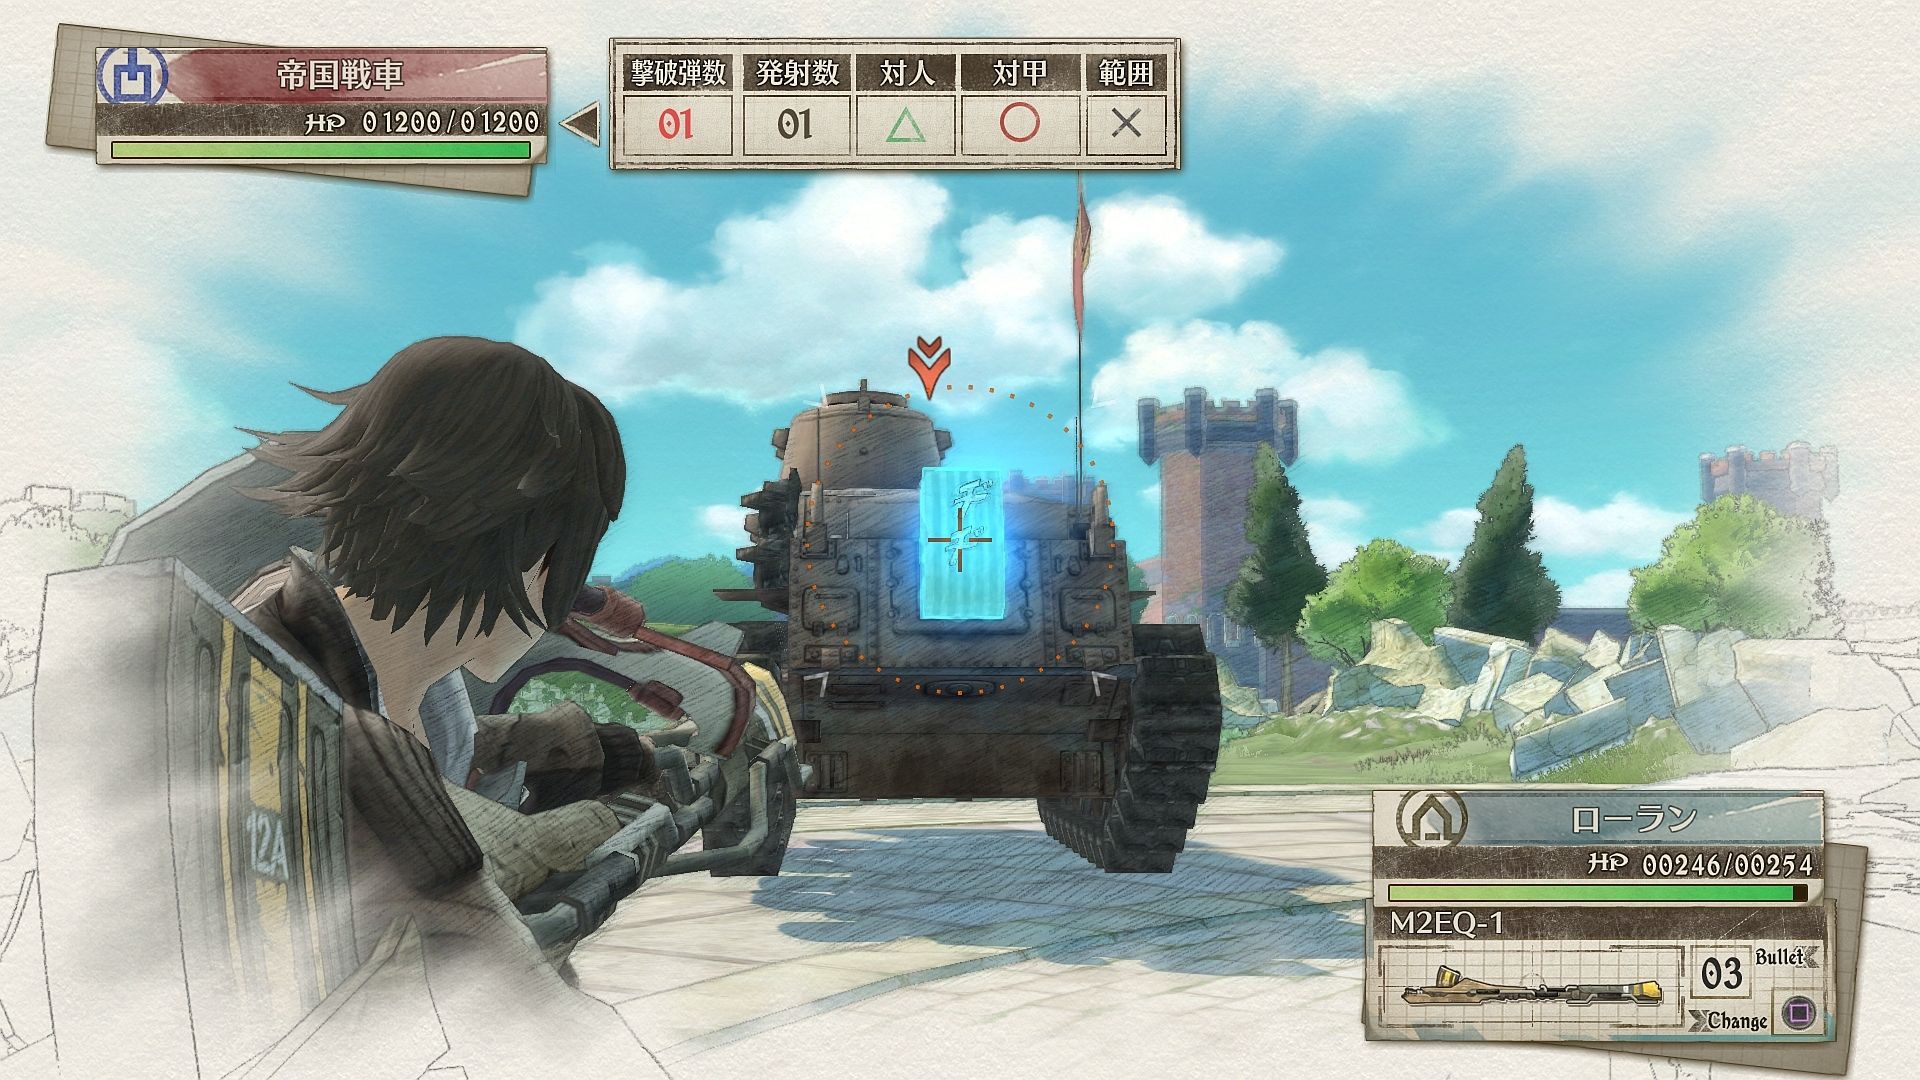 http://www.perfectly-nintendo.com/wp-content/gallery/valkyria-chronicles-4-27-12-2017/39.jpg